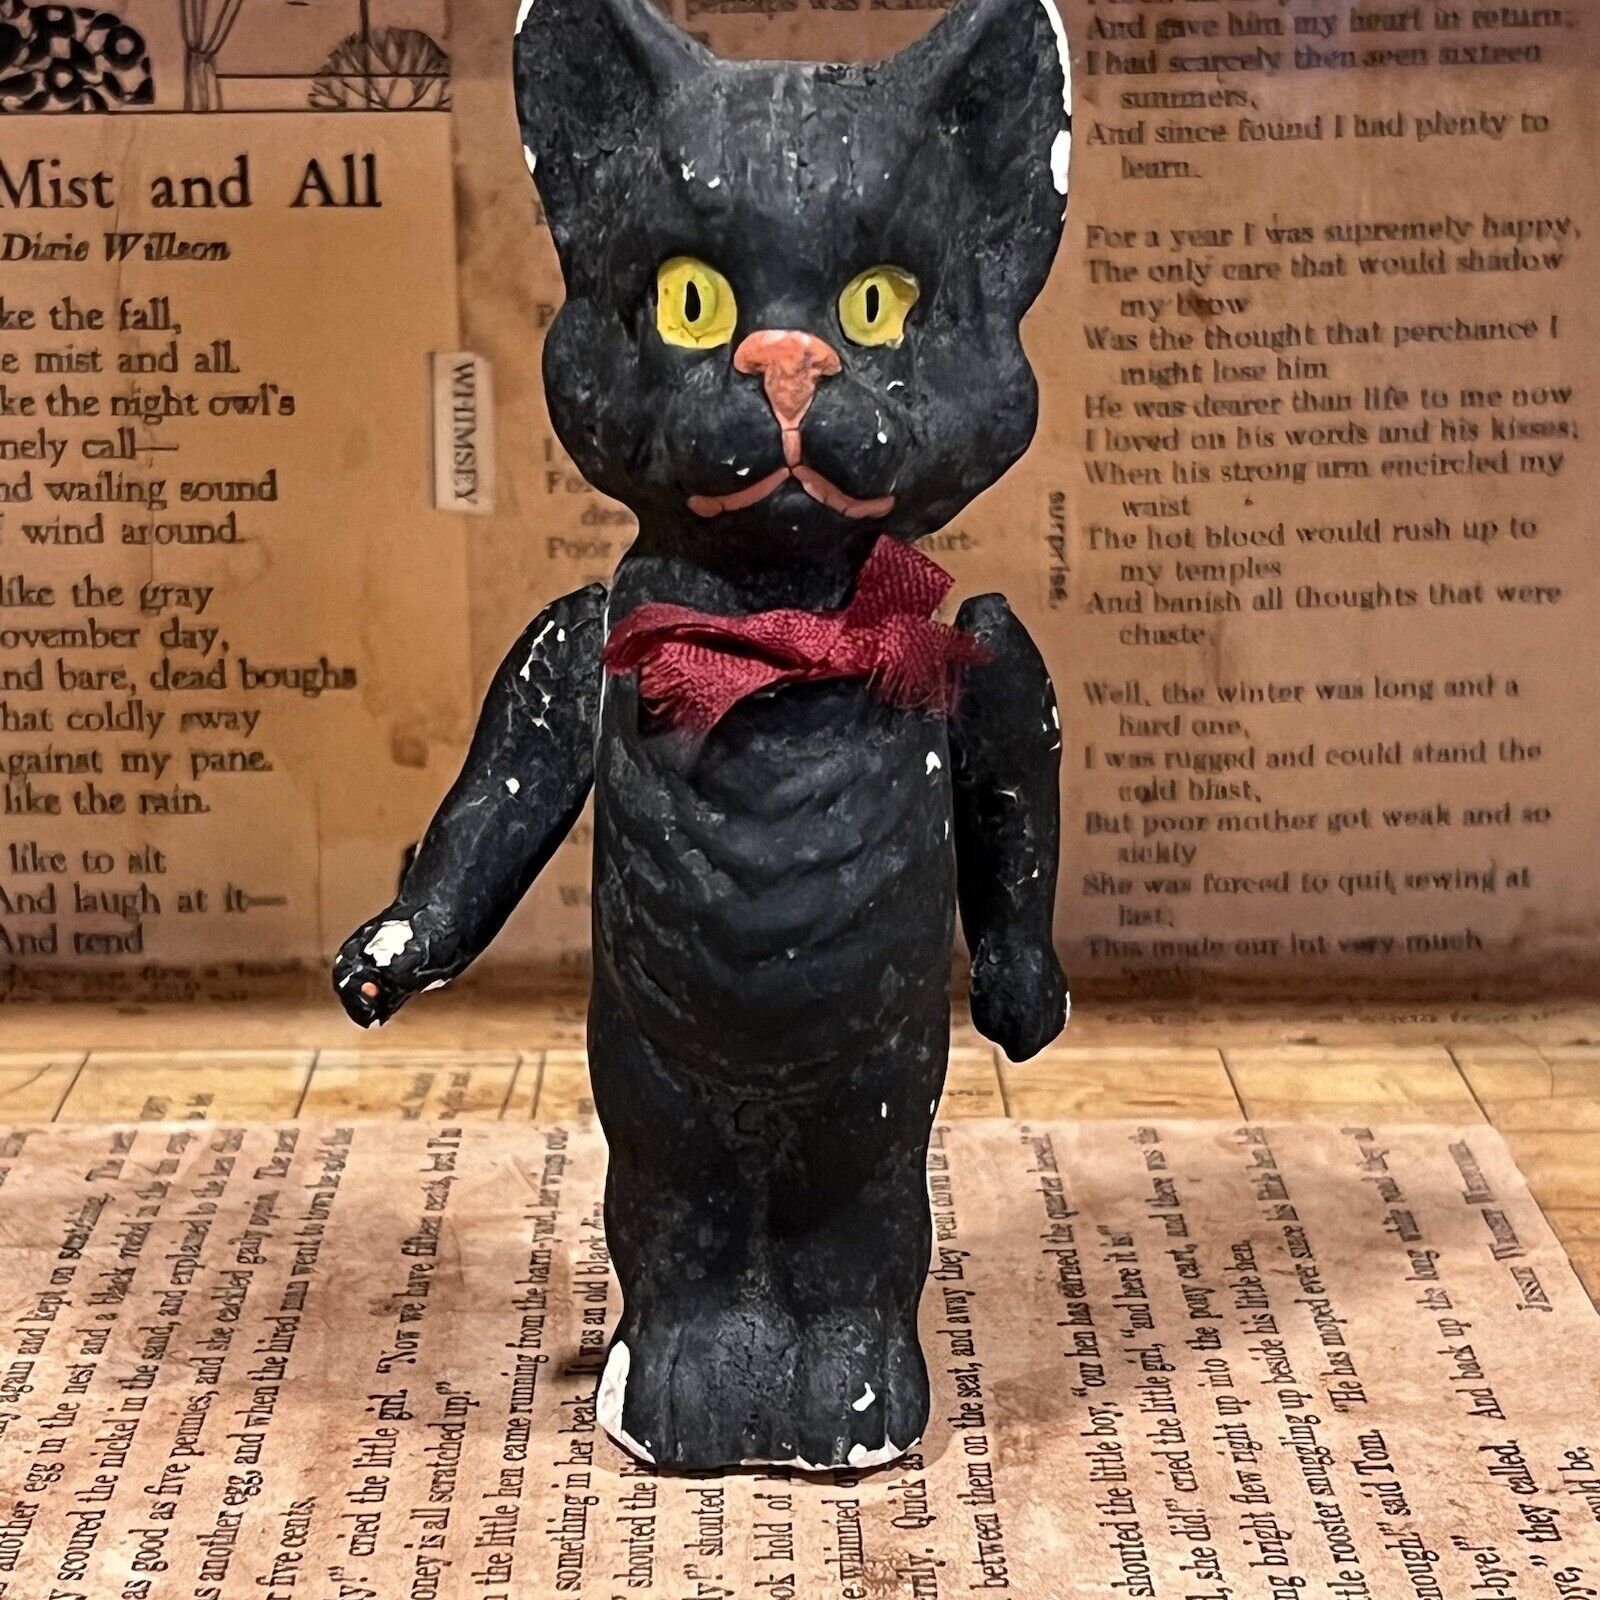 RARE Antique Vintage Halloween Compo Scary Black Cat Jointed Arms GERMANY